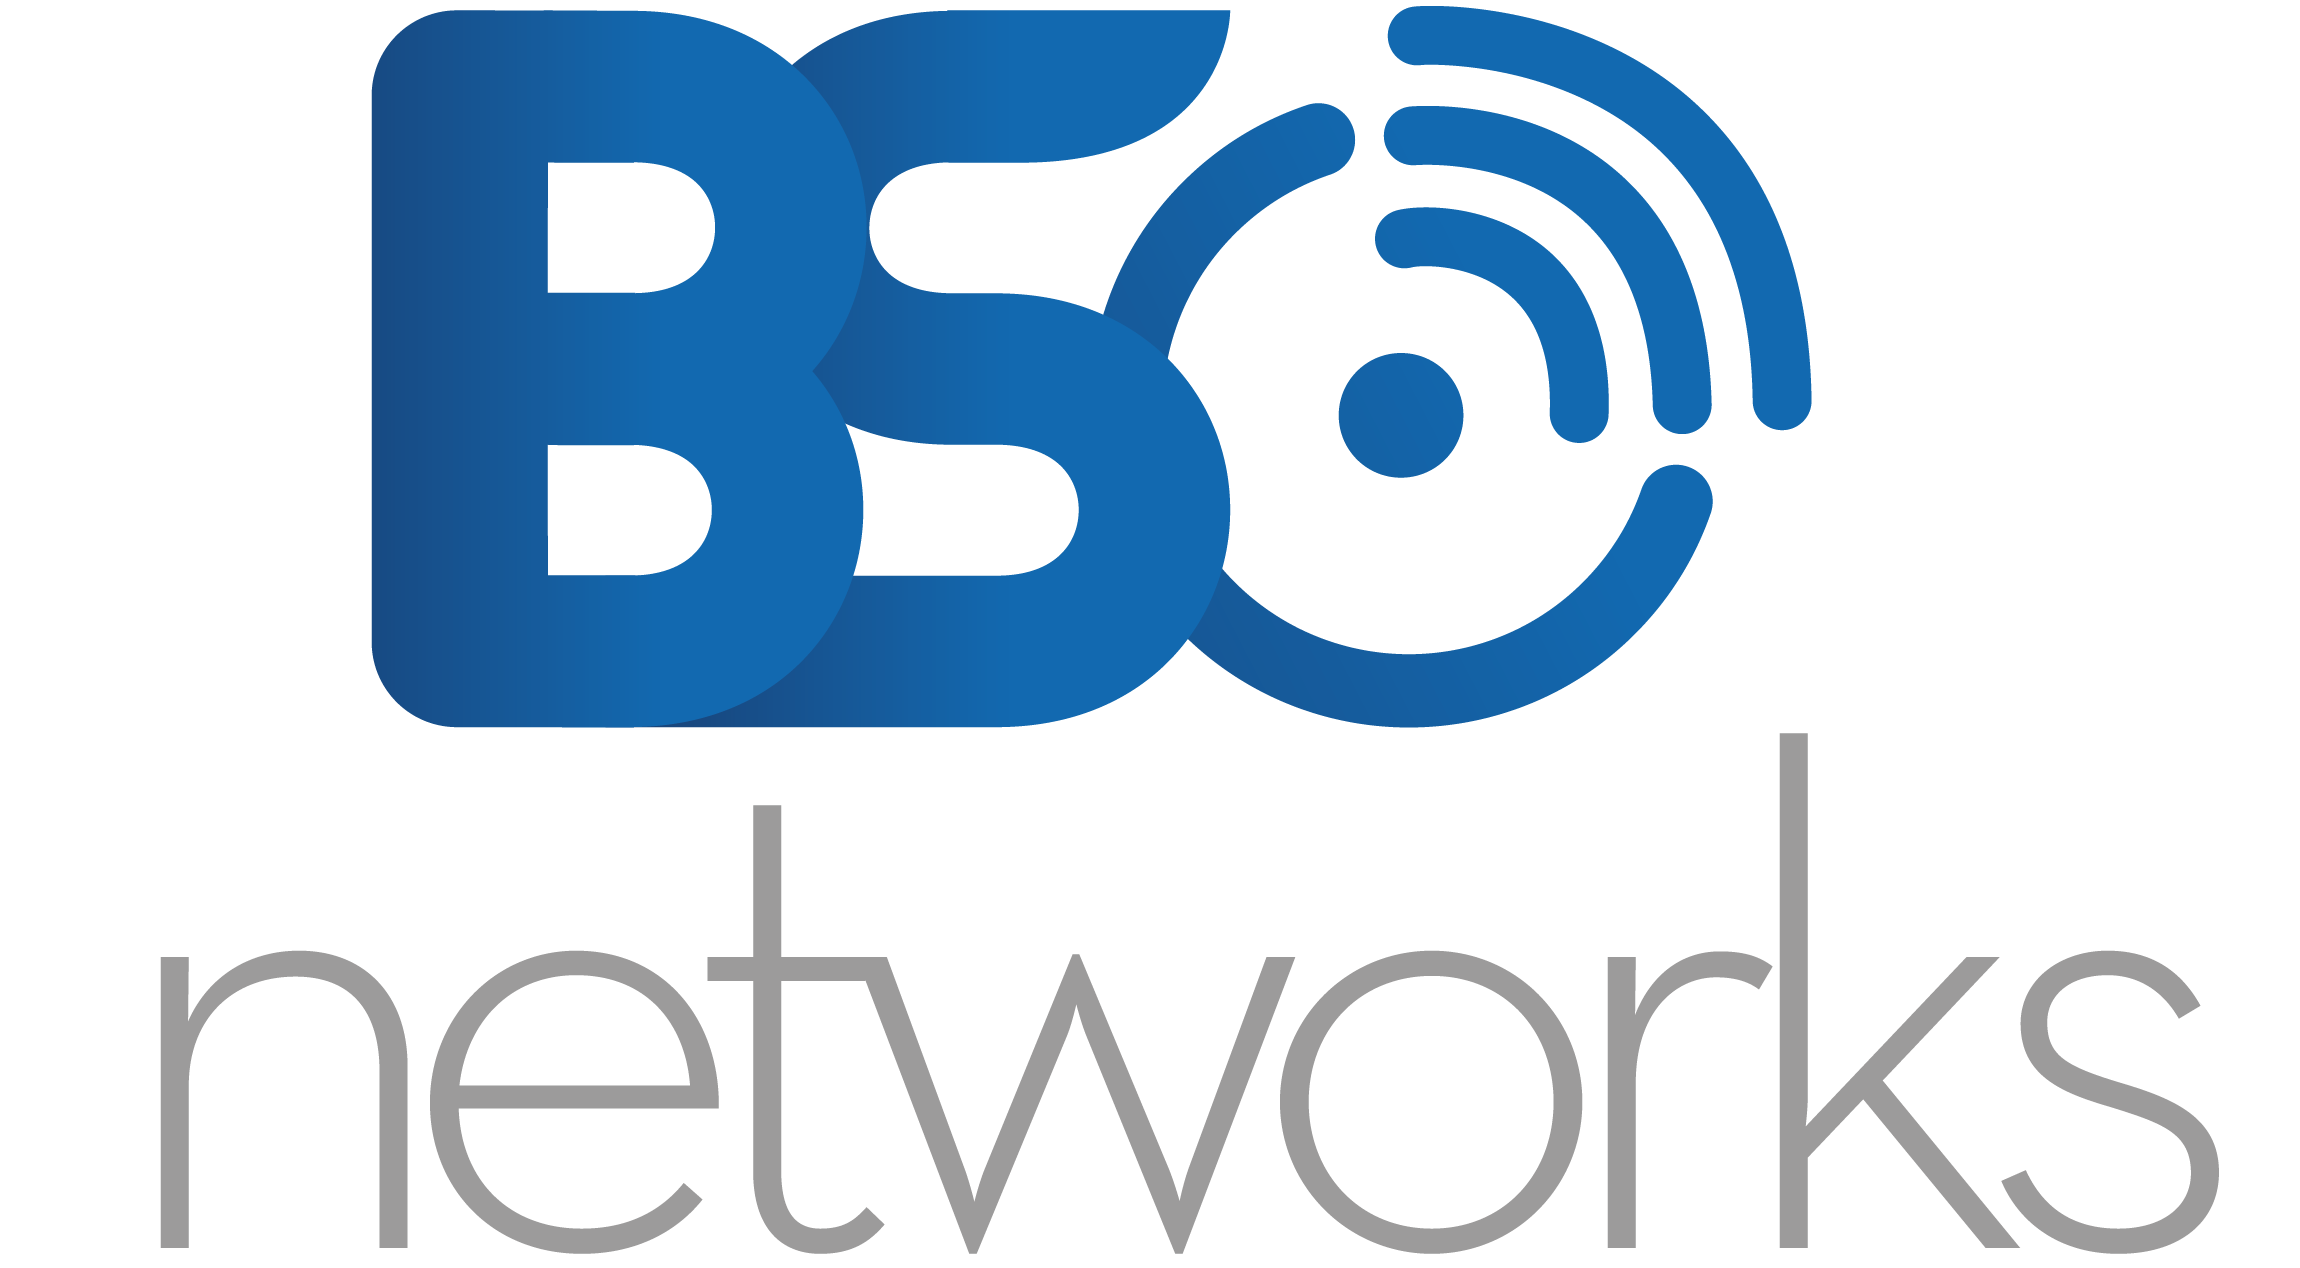 BS Networks